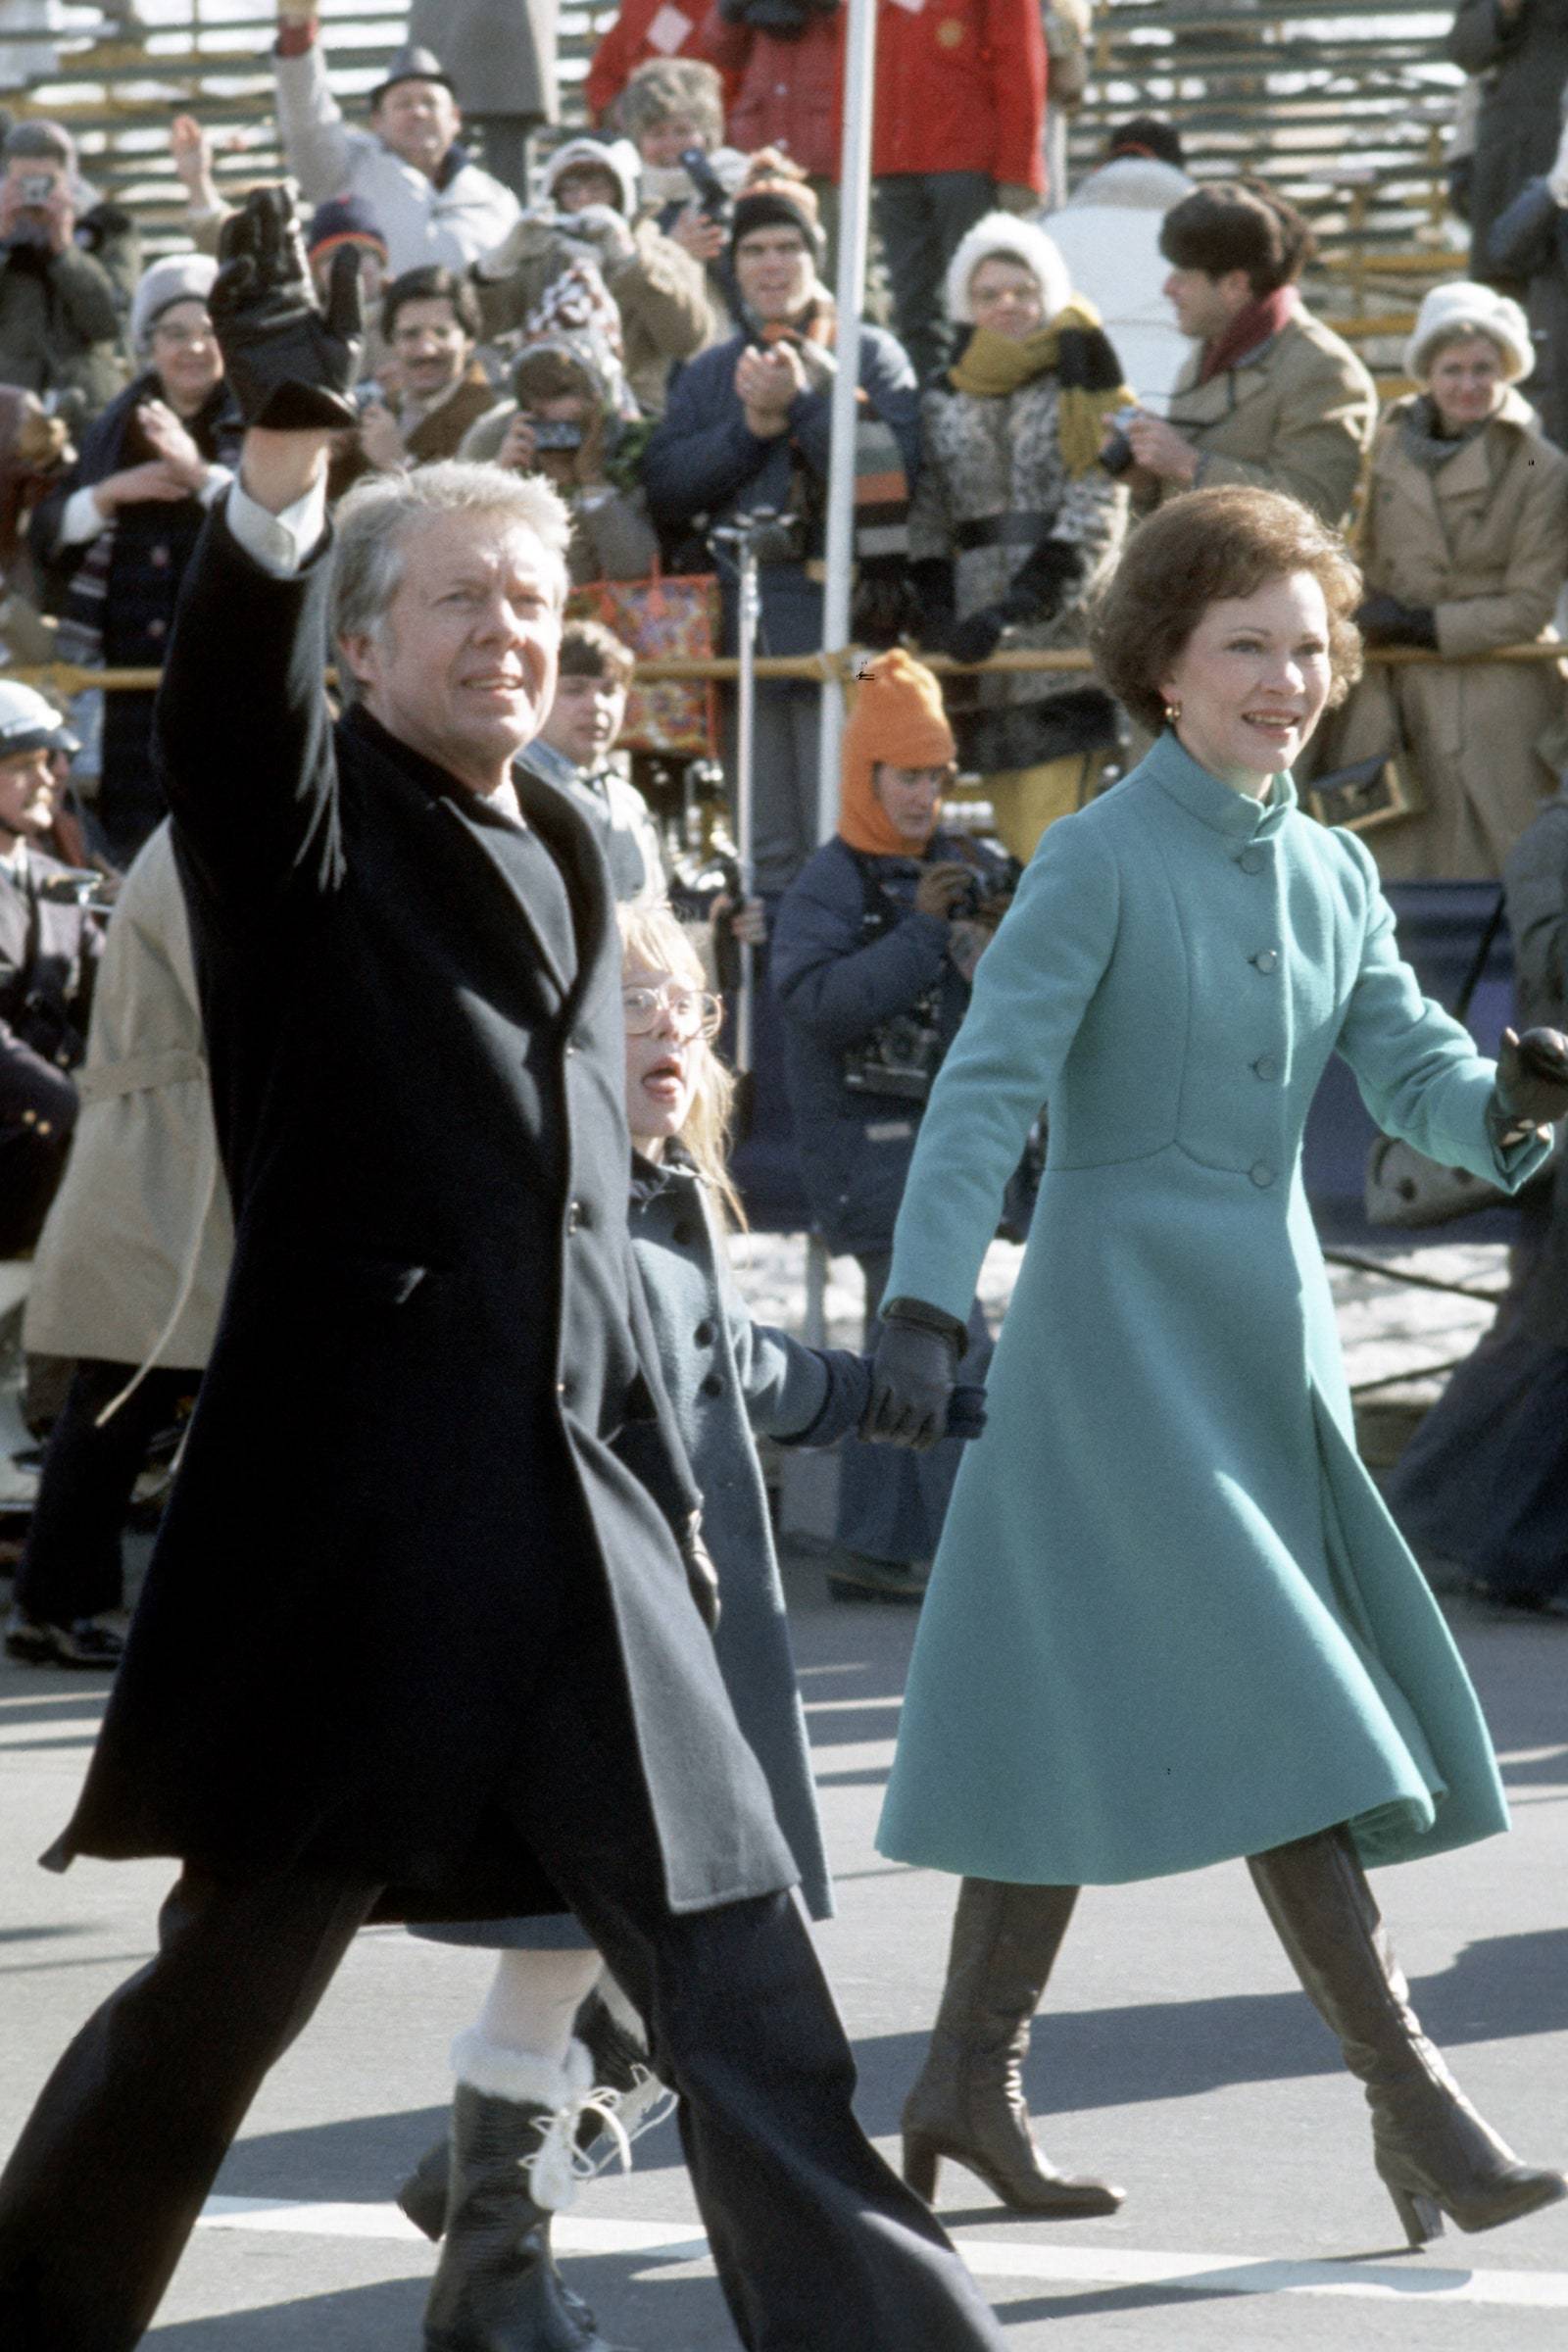 Rosalynn Carter, 1977 / Fot. Ron Galella/Ron Galella Collection via Getty Images